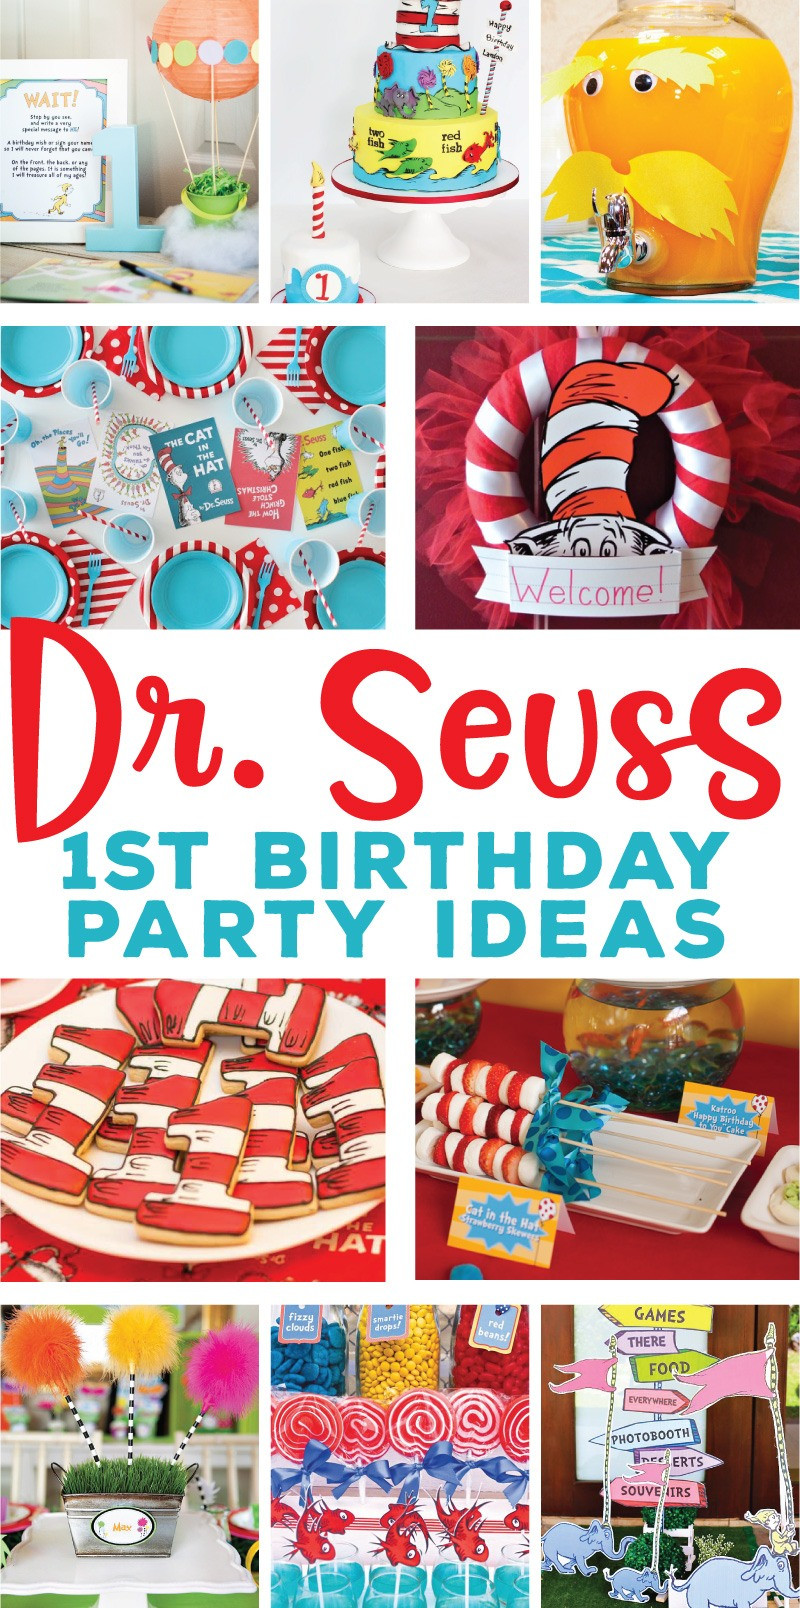 Dr Seuss 1st Birthday Party Decorations
 The Best Dr Seuss 1st Birthday Party Ideas on Love the Day